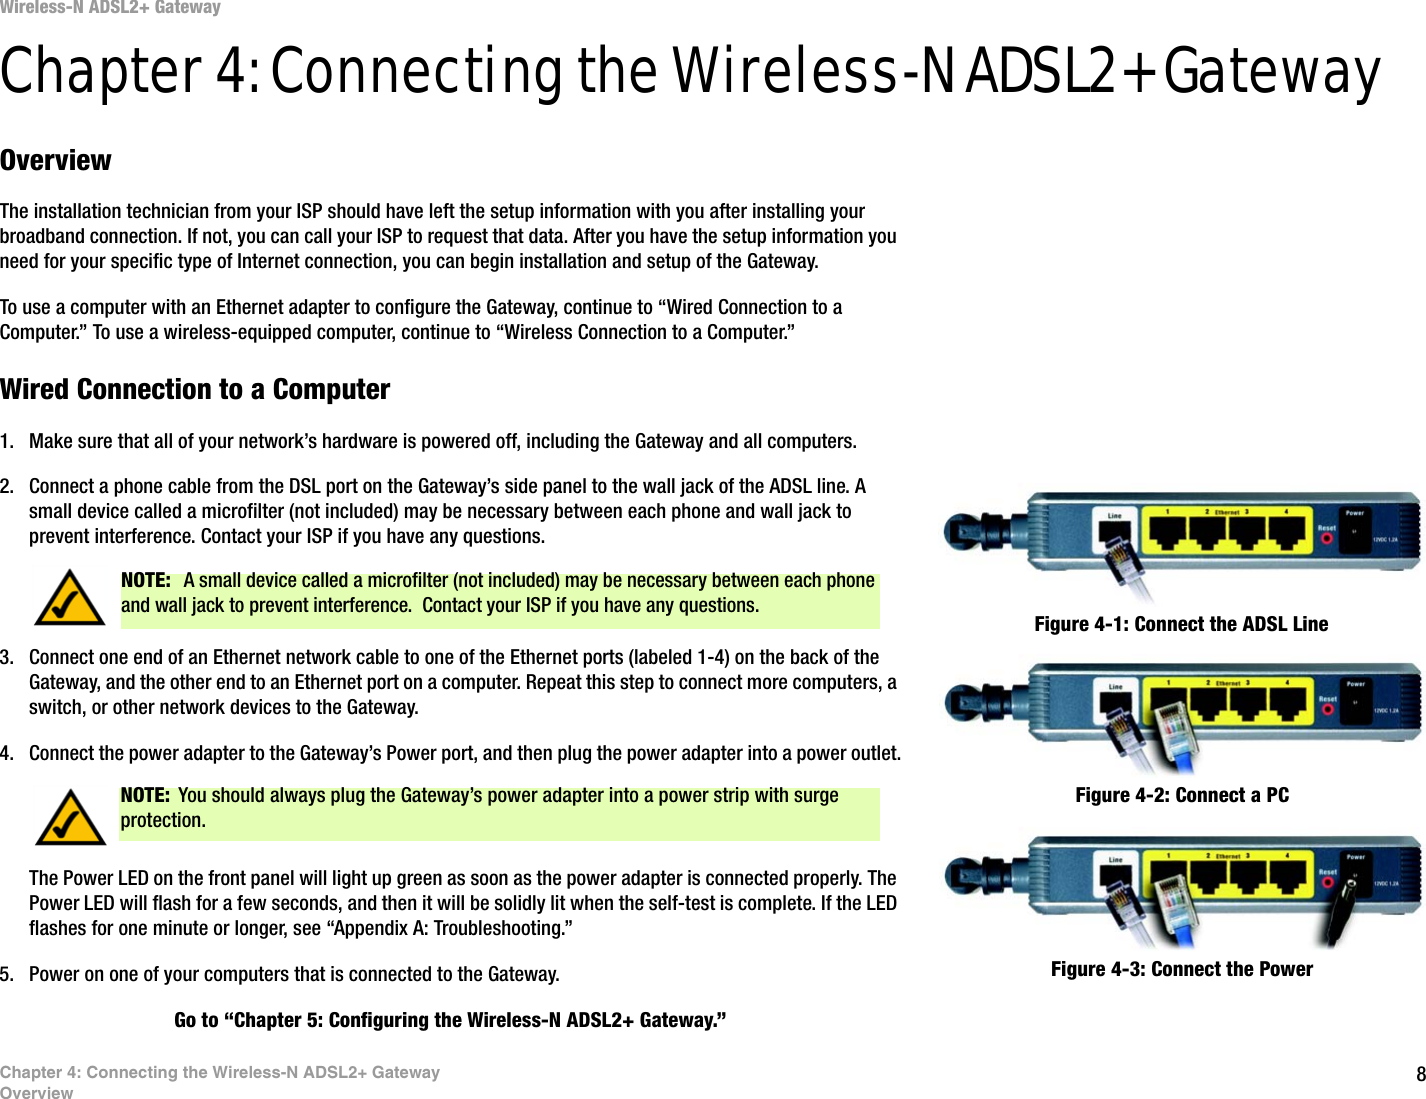 8Chapter 4: Connecting the Wireless-N ADSL2+ GatewayOverviewWireless-N ADSL2+ GatewayChapter 4: Connecting the Wireless-N ADSL2+ GatewayOverviewThe installation technician from your ISP should have left the setup information with you after installing your broadband connection. If not, you can call your ISP to request that data. After you have the setup information you need for your specific type of Internet connection, you can begin installation and setup of the Gateway.To use a computer with an Ethernet adapter to configure the Gateway, continue to “Wired Connection to a Computer.” To use a wireless-equipped computer, continue to “Wireless Connection to a Computer.”Wired Connection to a Computer1. Make sure that all of your network’s hardware is powered off, including the Gateway and all computers.2. Connect a phone cable from the DSL port on the Gateway’s side panel to the wall jack of the ADSL line. A small device called a microfilter (not included) may be necessary between each phone and wall jack to prevent interference. Contact your ISP if you have any questions.3. Connect one end of an Ethernet network cable to one of the Ethernet ports (labeled 1-4) on the back of the Gateway, and the other end to an Ethernet port on a computer. Repeat this step to connect more computers, a switch, or other network devices to the Gateway.4. Connect the power adapter to the Gateway’s Power port, and then plug the power adapter into a power outlet.The Power LED on the front panel will light up green as soon as the power adapter is connected properly. The Power LED will flash for a few seconds, and then it will be solidly lit when the self-test is complete. If the LED flashes for one minute or longer, see “Appendix A: Troubleshooting.”5. Power on one of your computers that is connected to the Gateway.Go to “Chapter 5: Configuring the Wireless-N ADSL2+ Gateway.”NOTE:  A small device called a microfilter (not included) may be necessary between each phone and wall jack to prevent interference.  Contact your ISP if you have any questions.NOTE: You should always plug the Gateway’s power adapter into a power strip with surge protection.Figure 4-2: Connect a PCFigure 4-1: Connect the ADSL LineFigure 4-3: Connect the Power